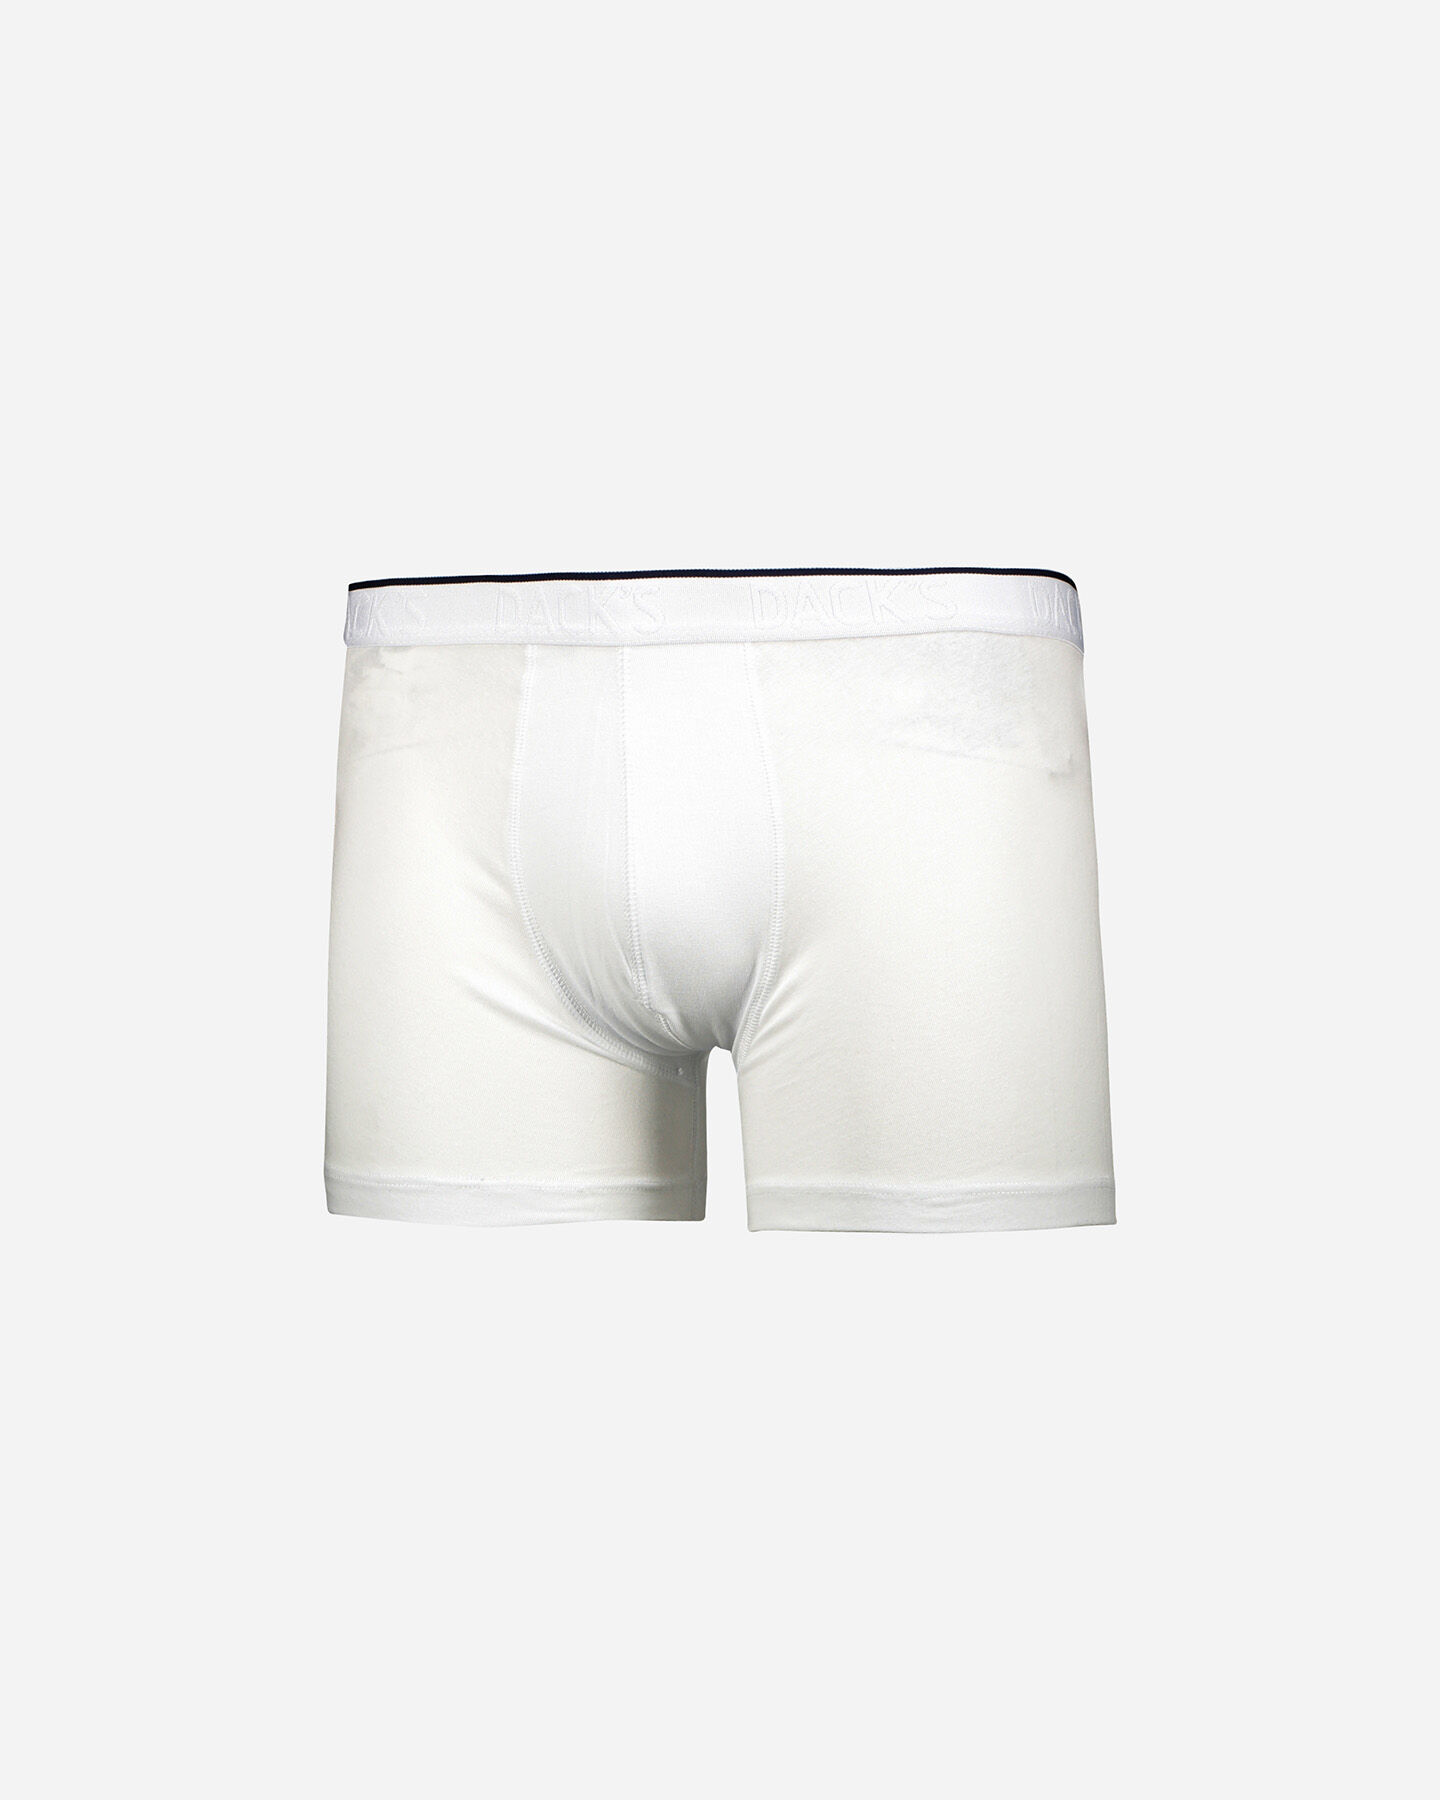  Intimo DACK'S BIPACK BASIC BOXER M S4061964|519/001|S scatto 1